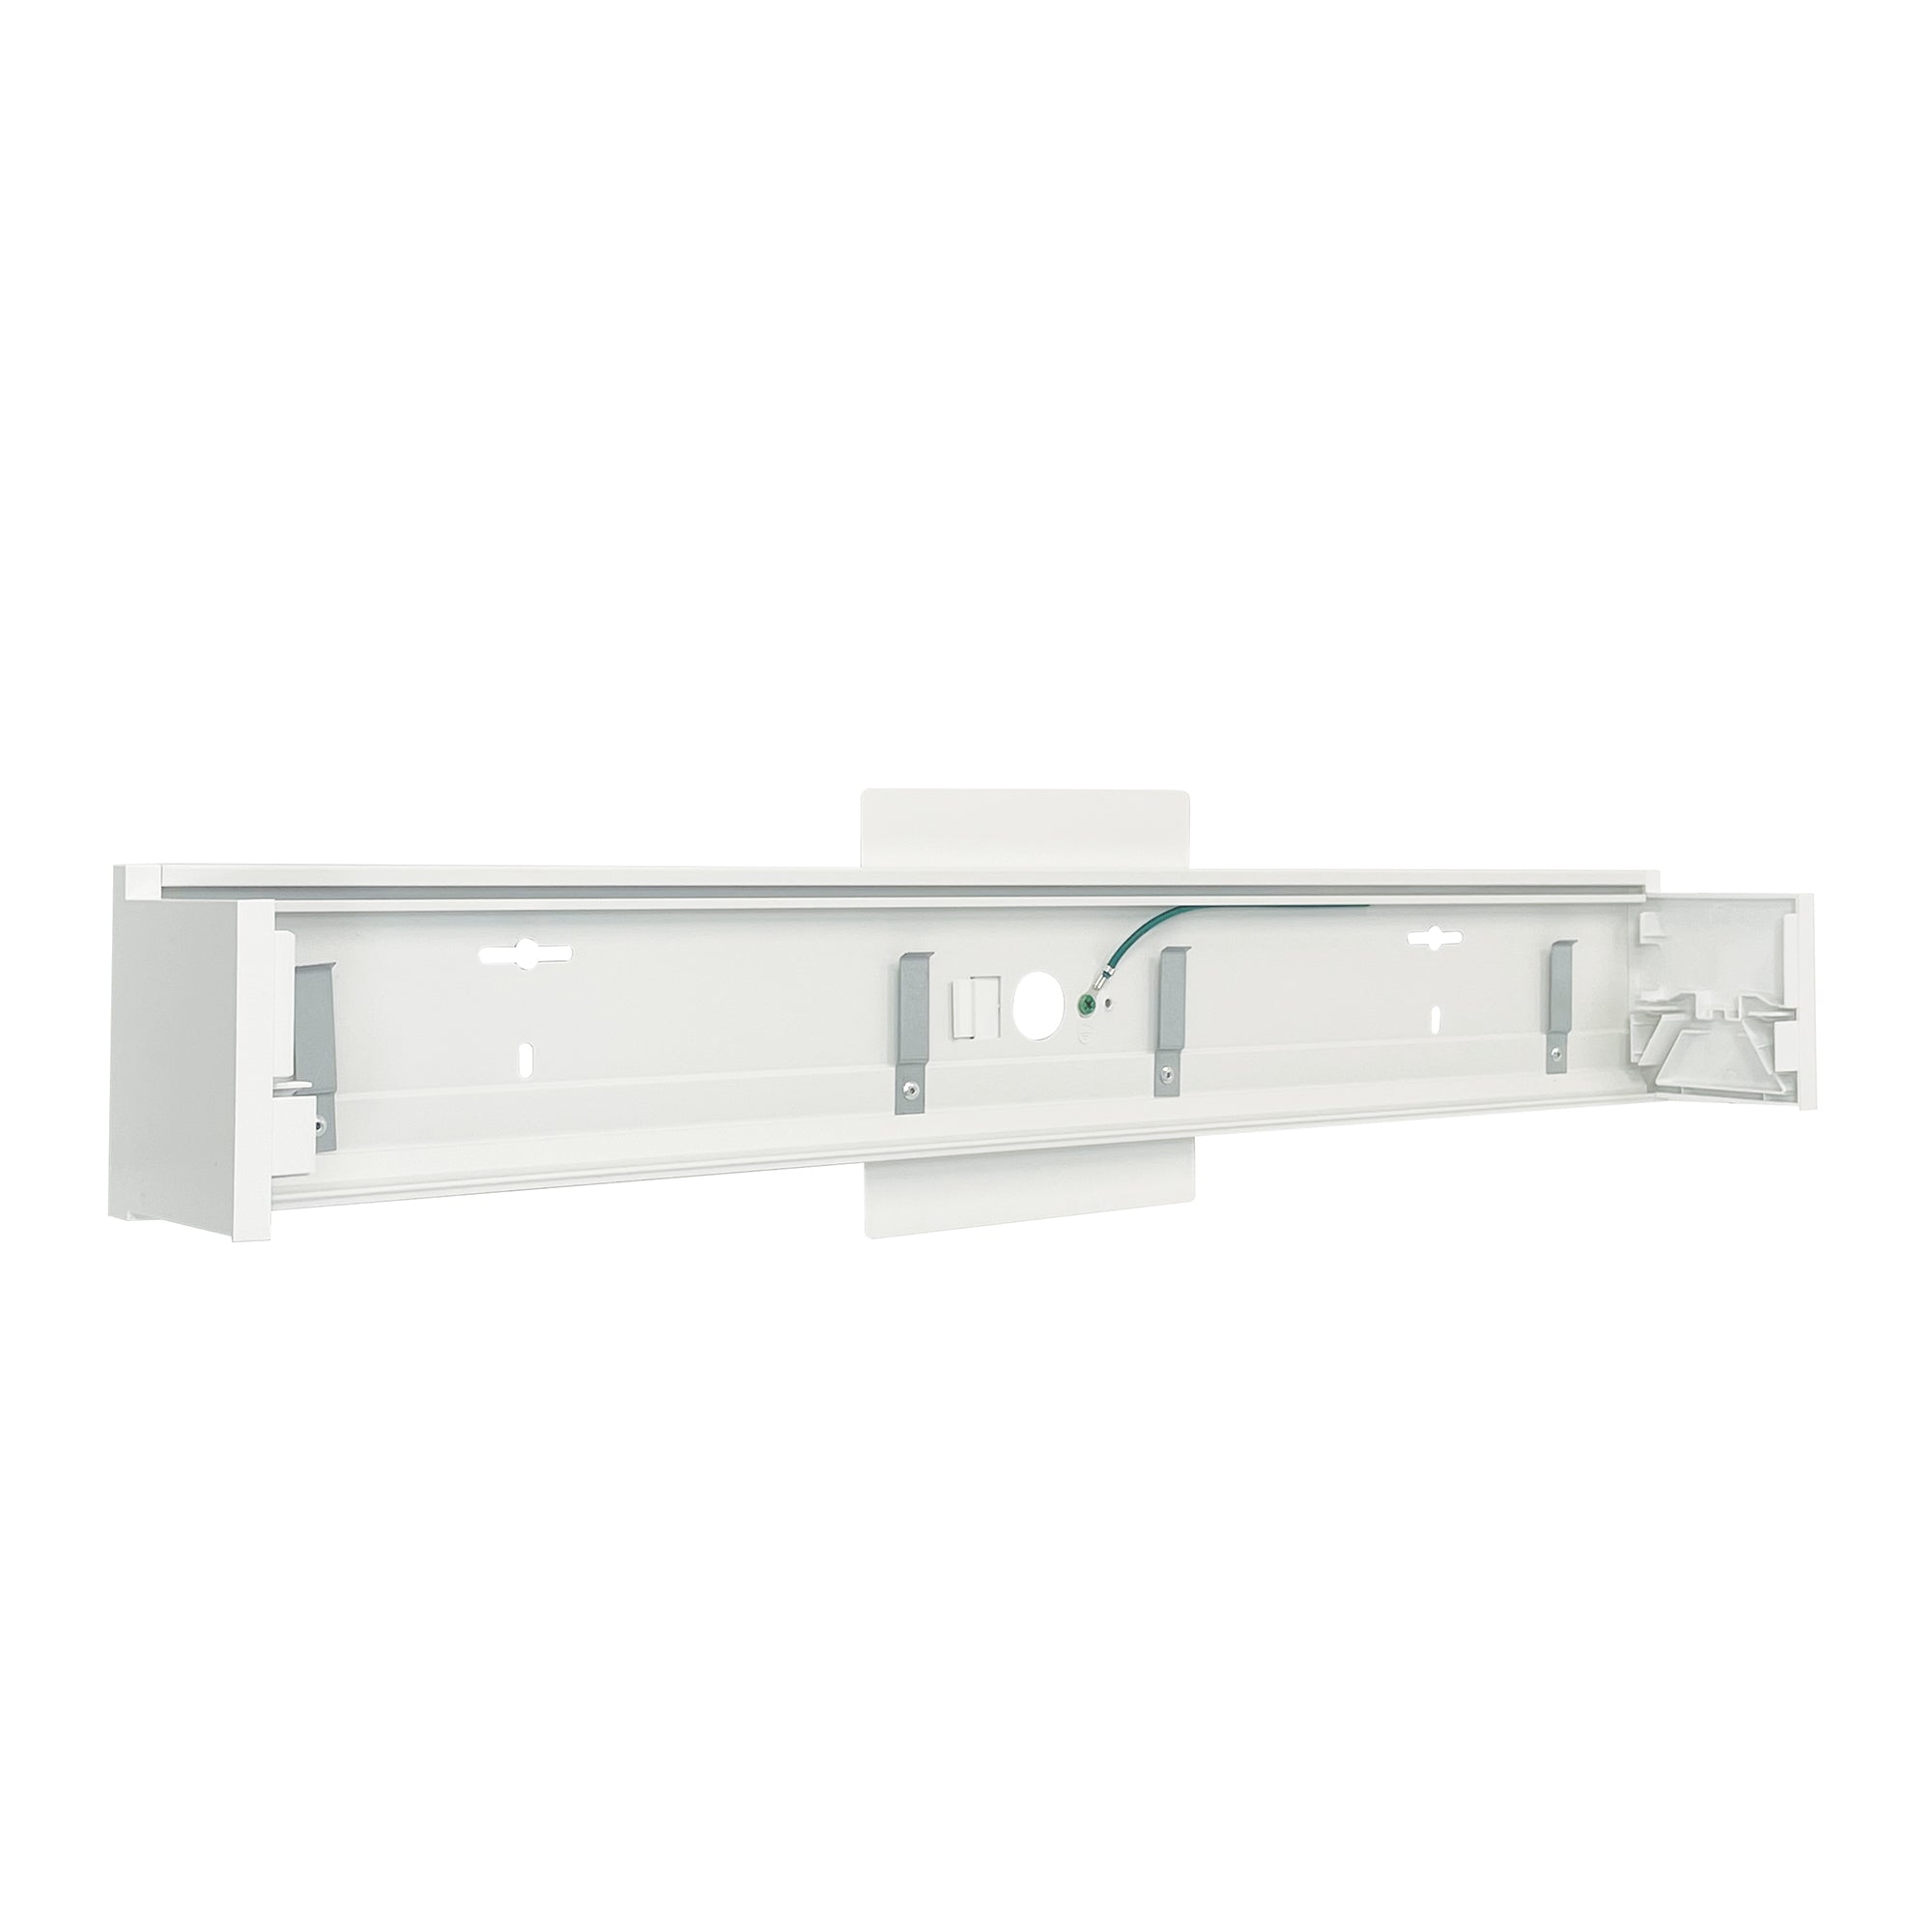 Nora Lighting NLUD-4WMW/6W - Linear - Wall Mount Kit for NLUD-4334, White Finish, wired for EM